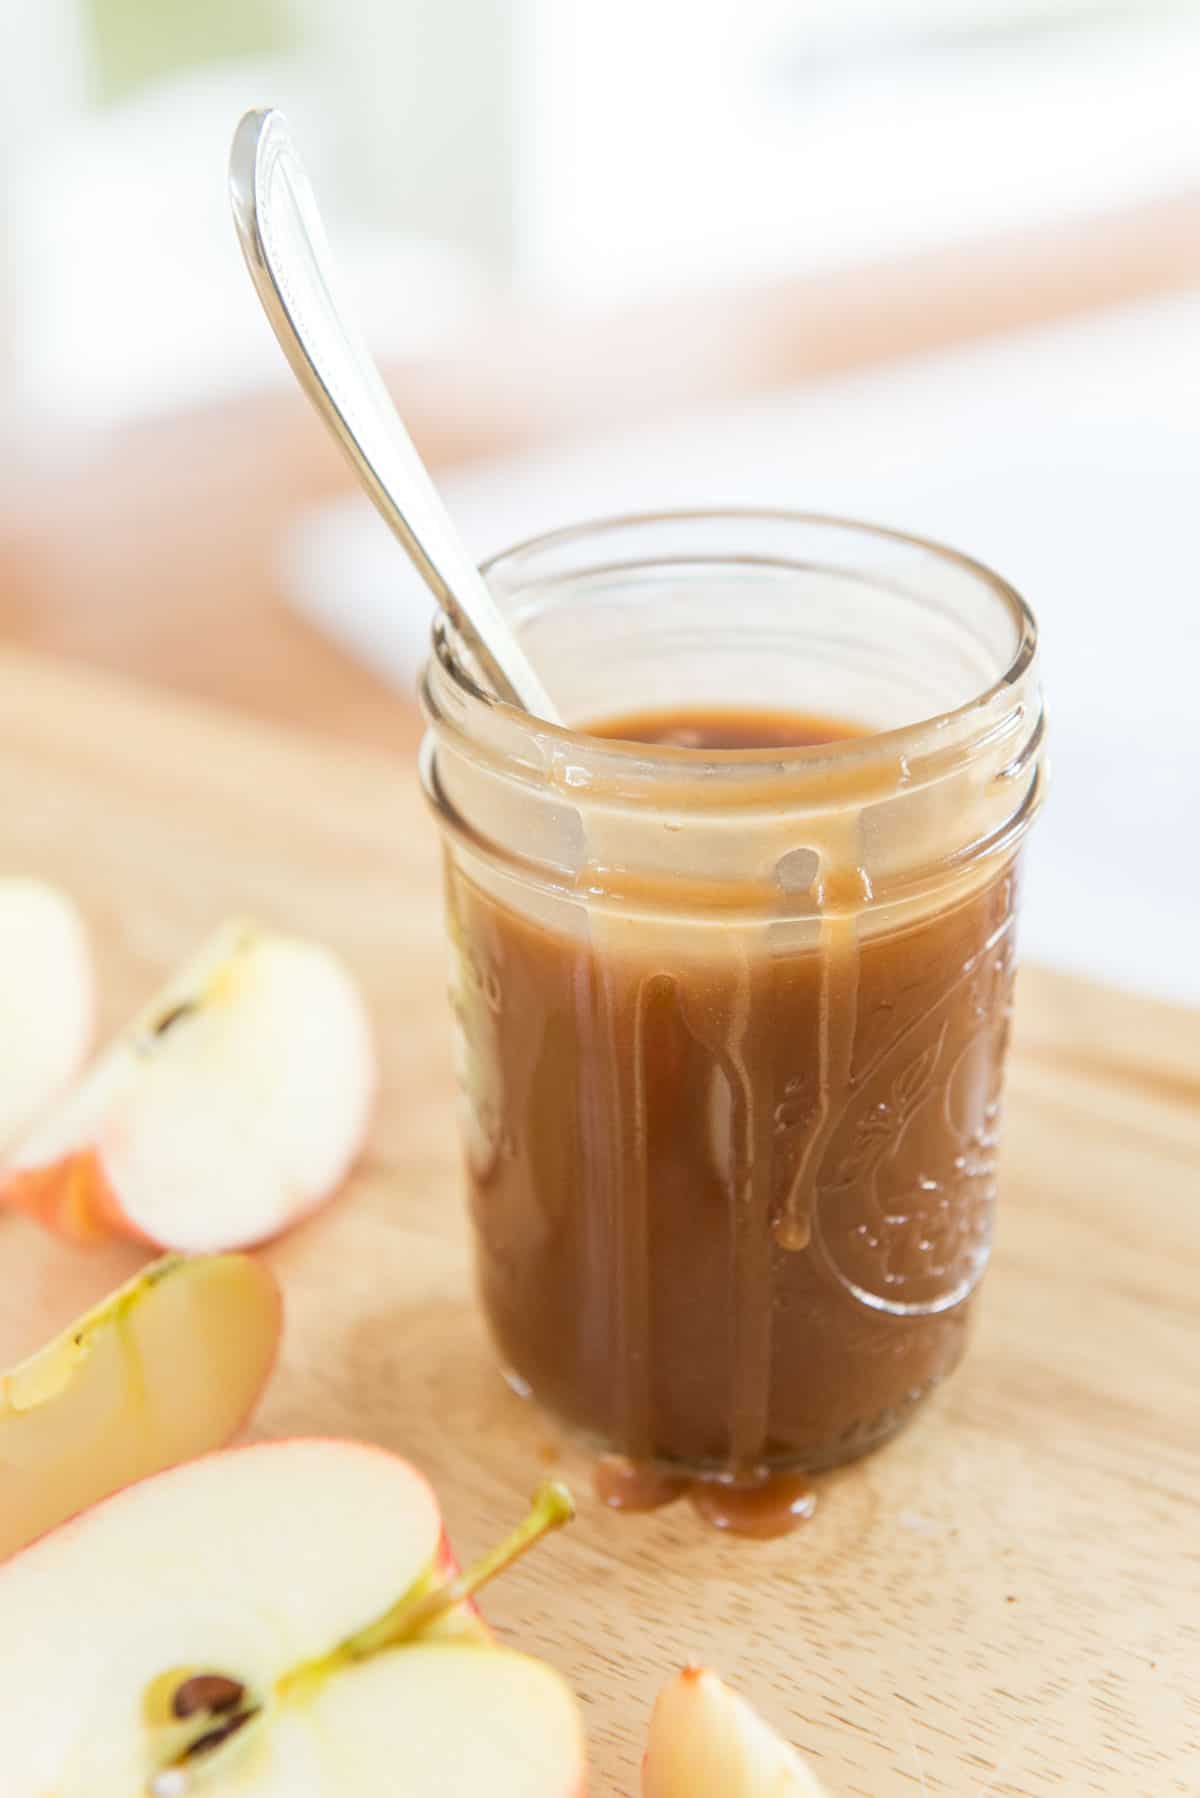 Caramel Sauce In a Glass Jar with Caramel Dripping Down the Side